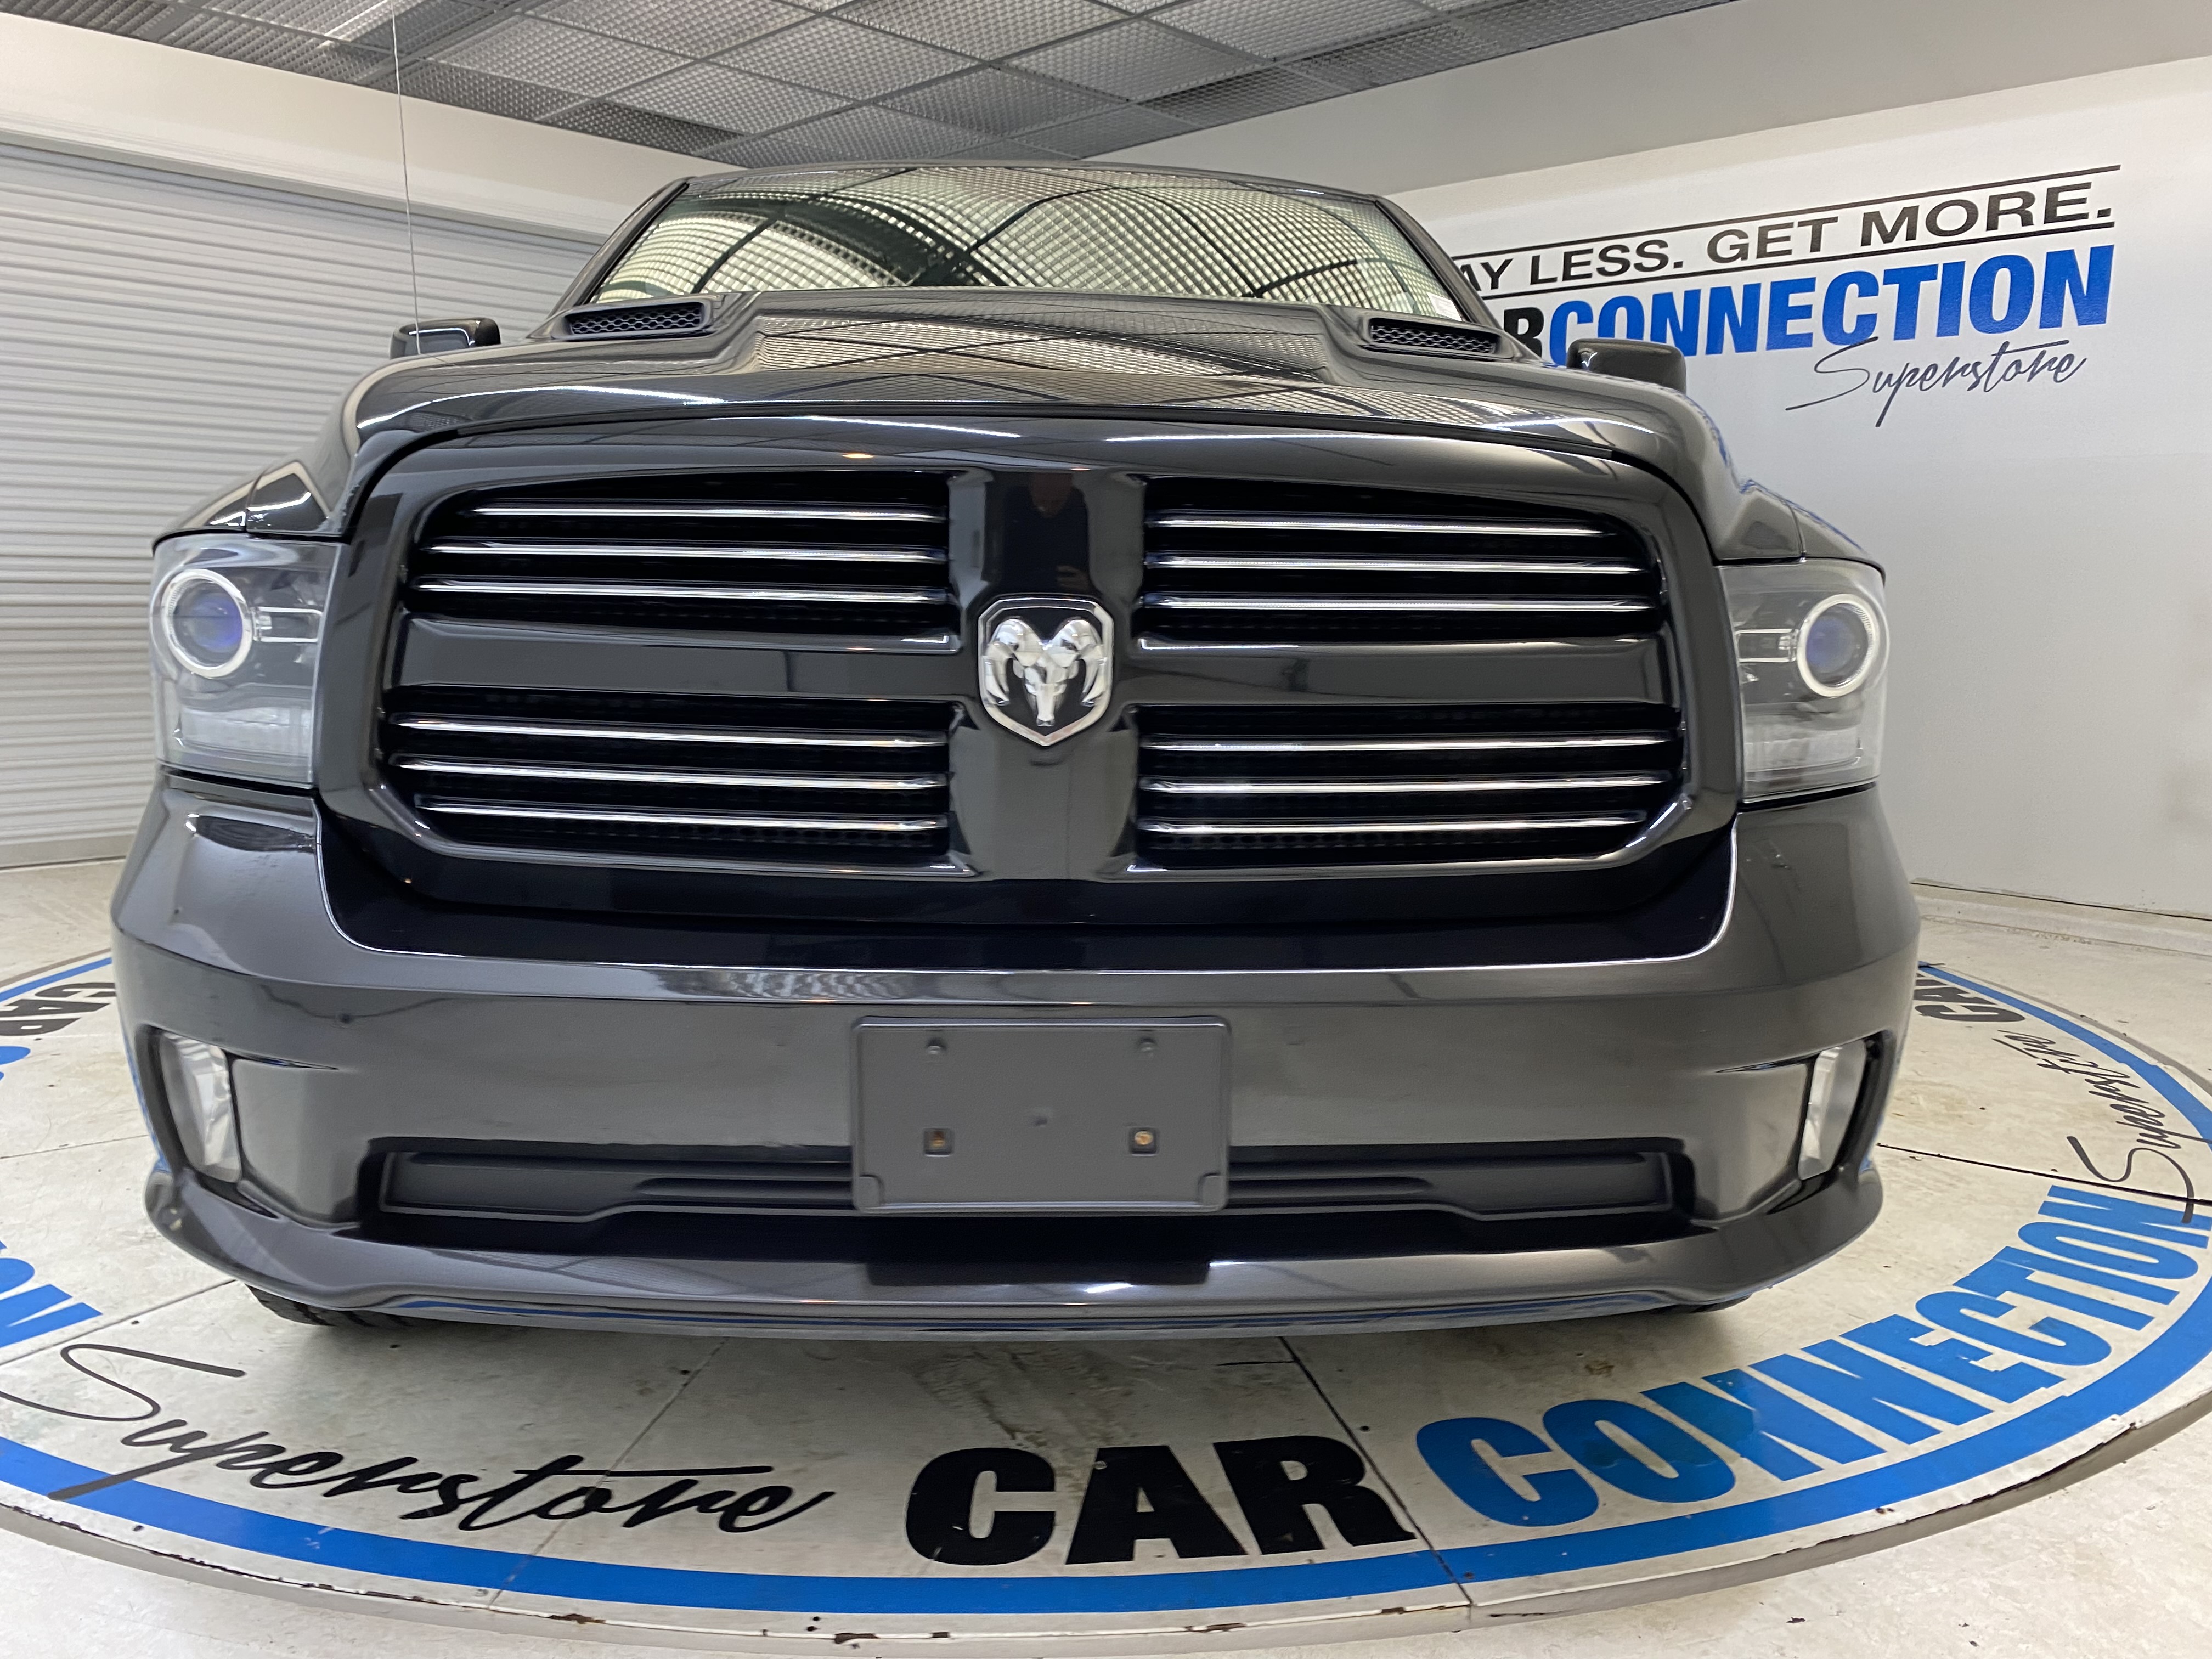 Car Connection Superstore - Used vehicle - Truck RAM 1500 Crew 2017